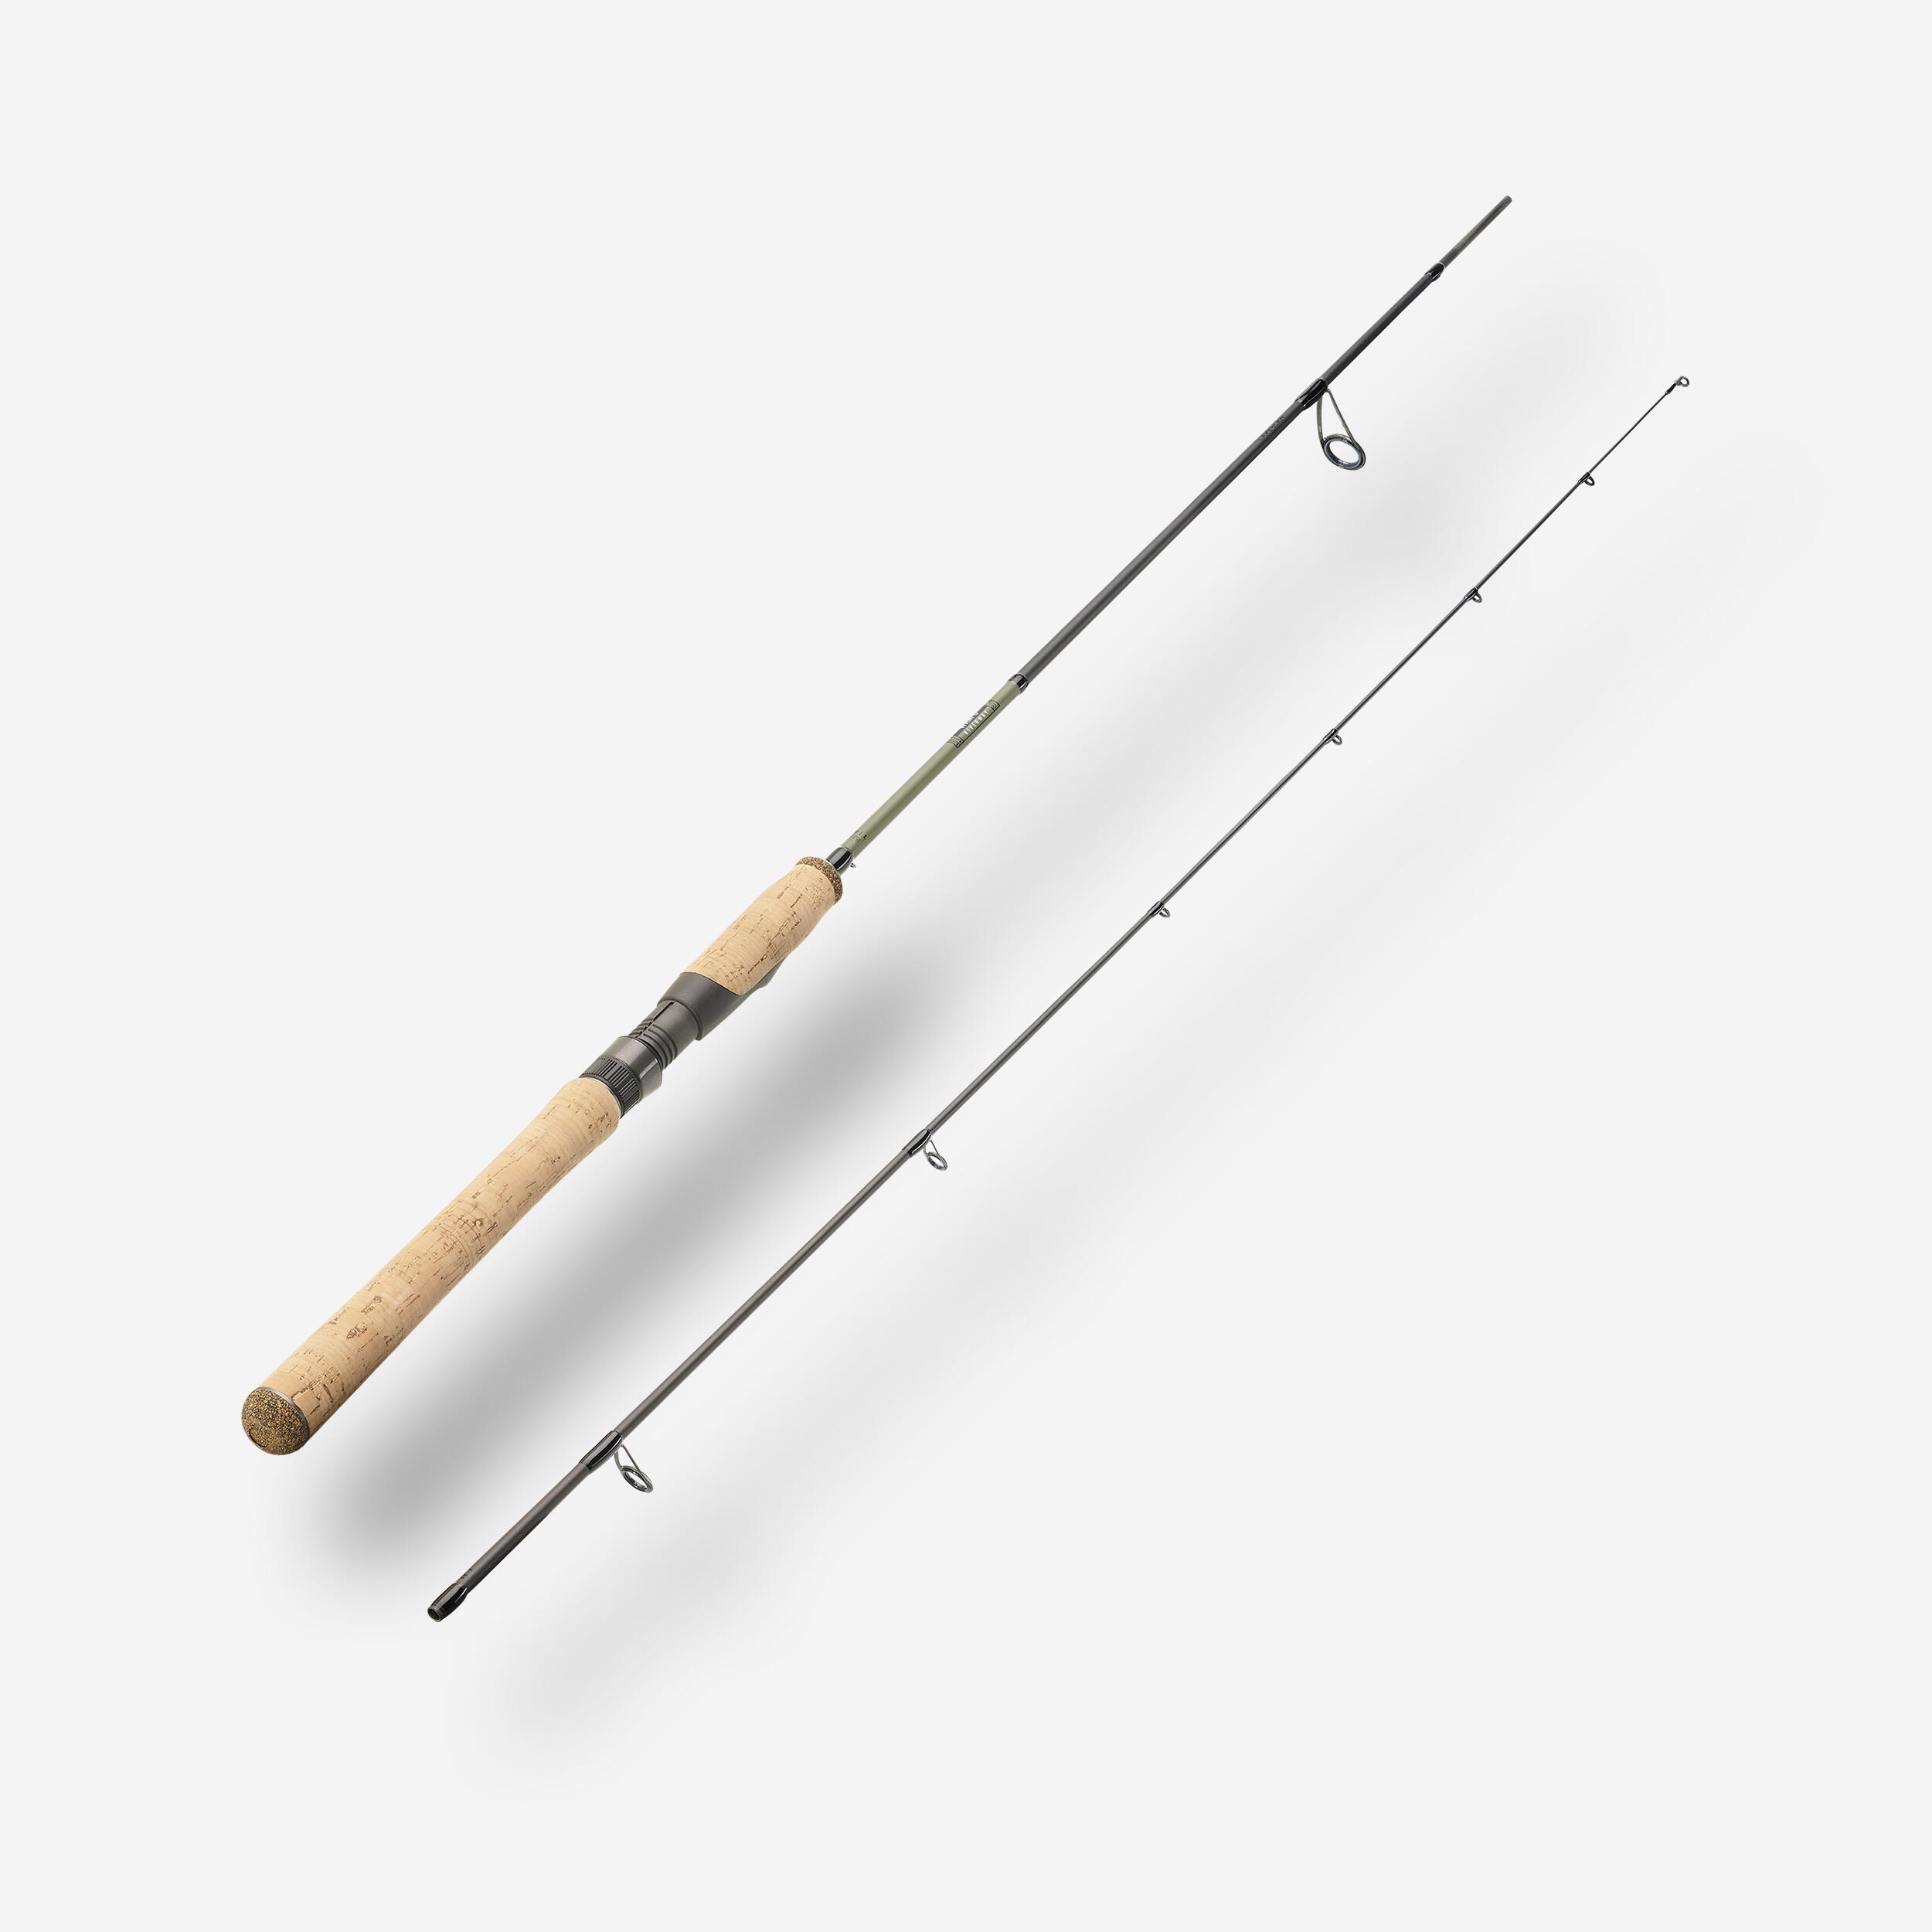 FIRSTFISH 300 Rod + Fly-line outfit for still fishing. - Caperlan